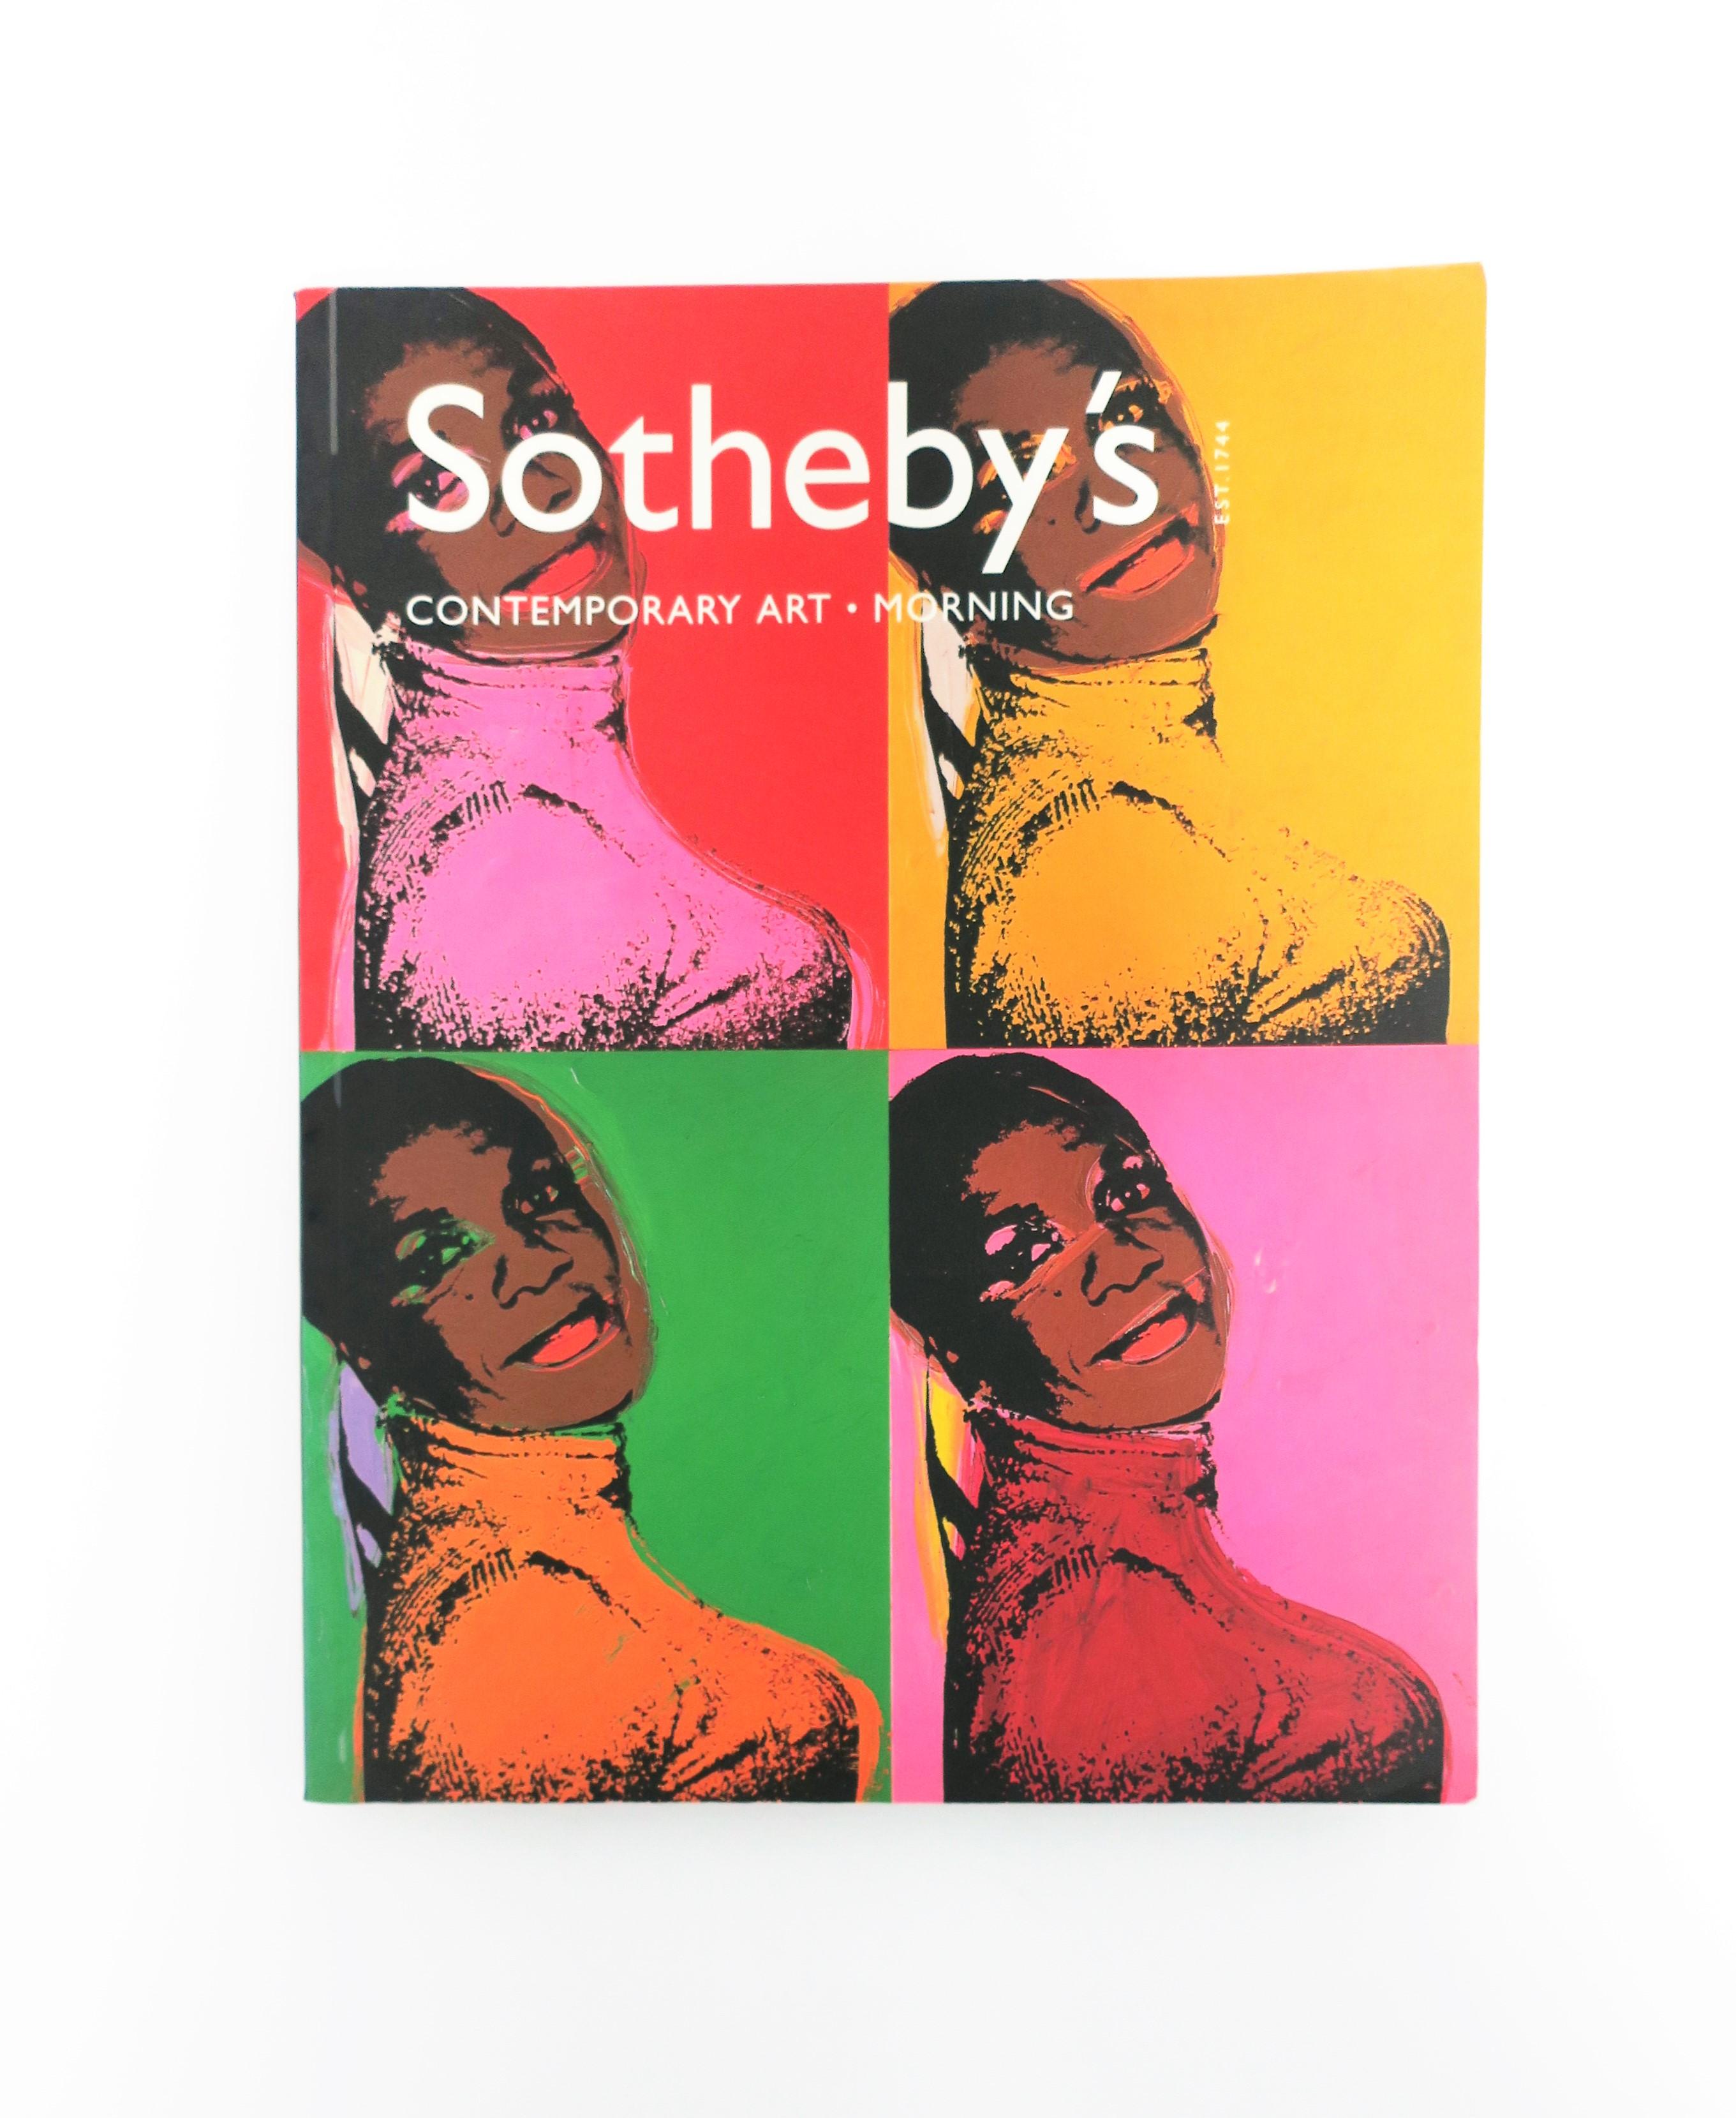 An Andy Warhol cover Contemporary Art Sotheby's New York 'Morning' sale catalog book, New York, May 16, 2001. Catalog: Contemporary Art, Part Two, Morning. Wednesday, May 16, 2001 at 10:15 AM. 

A beautifully done catalog book covering the May 16,